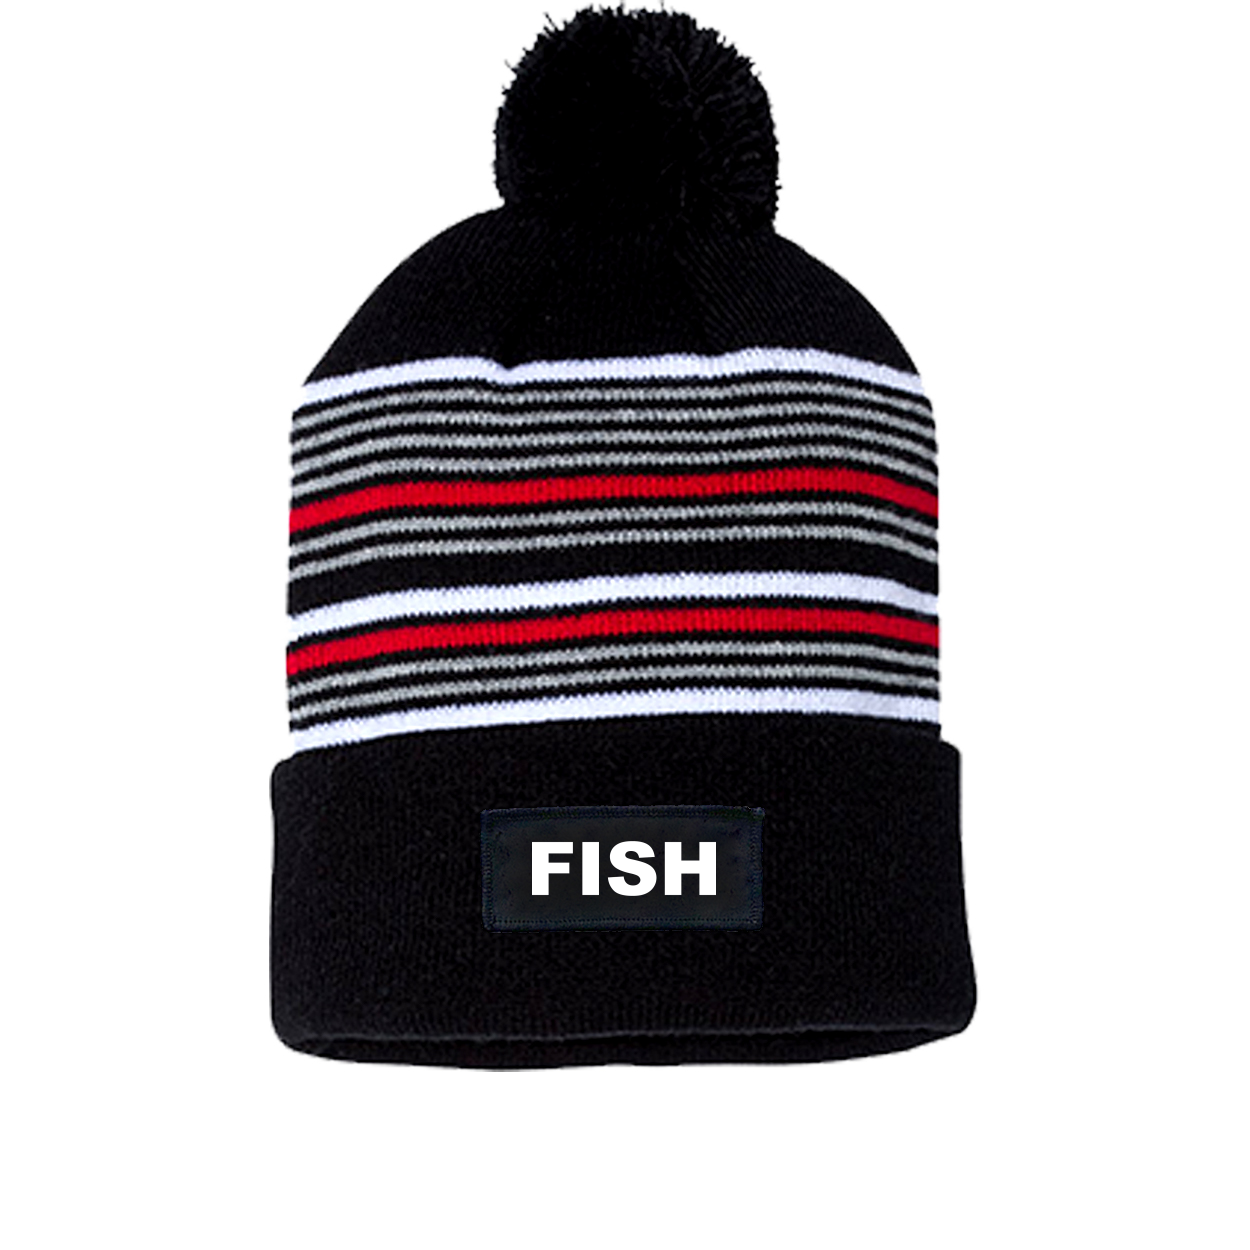 Fish Brand Logo Night Out Woven Patch Roll Up Pom Knit Beanie Black/ White/ Grey/ Red Beanie